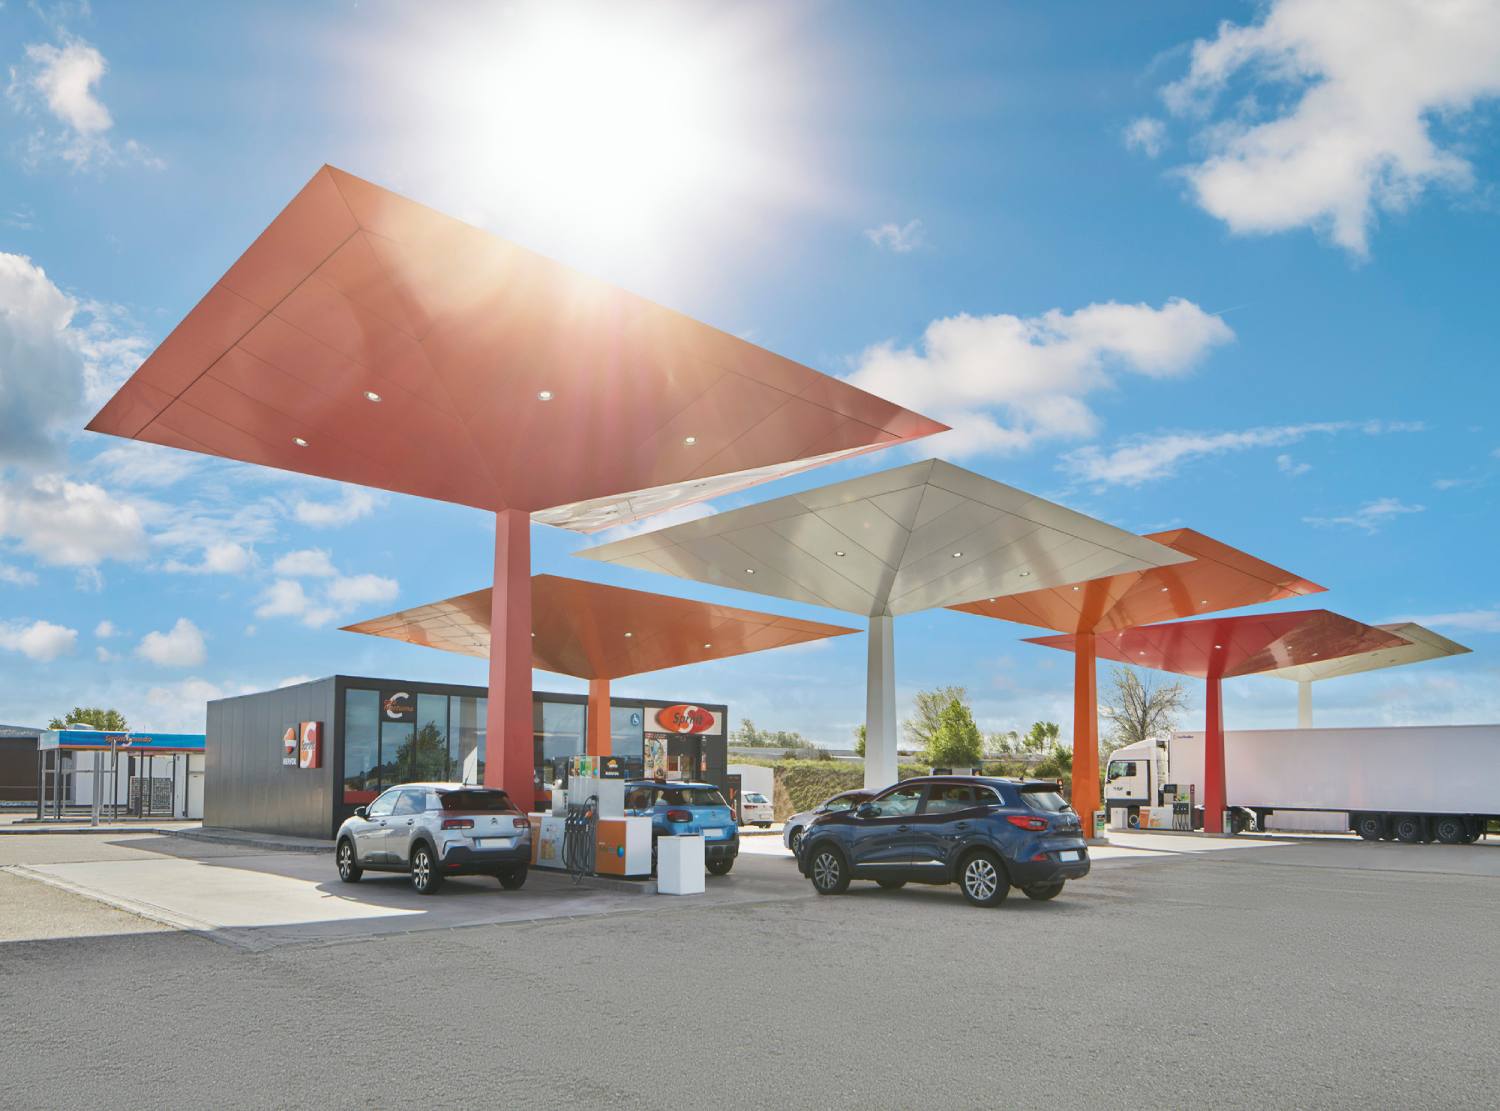 View of a Repsol service station